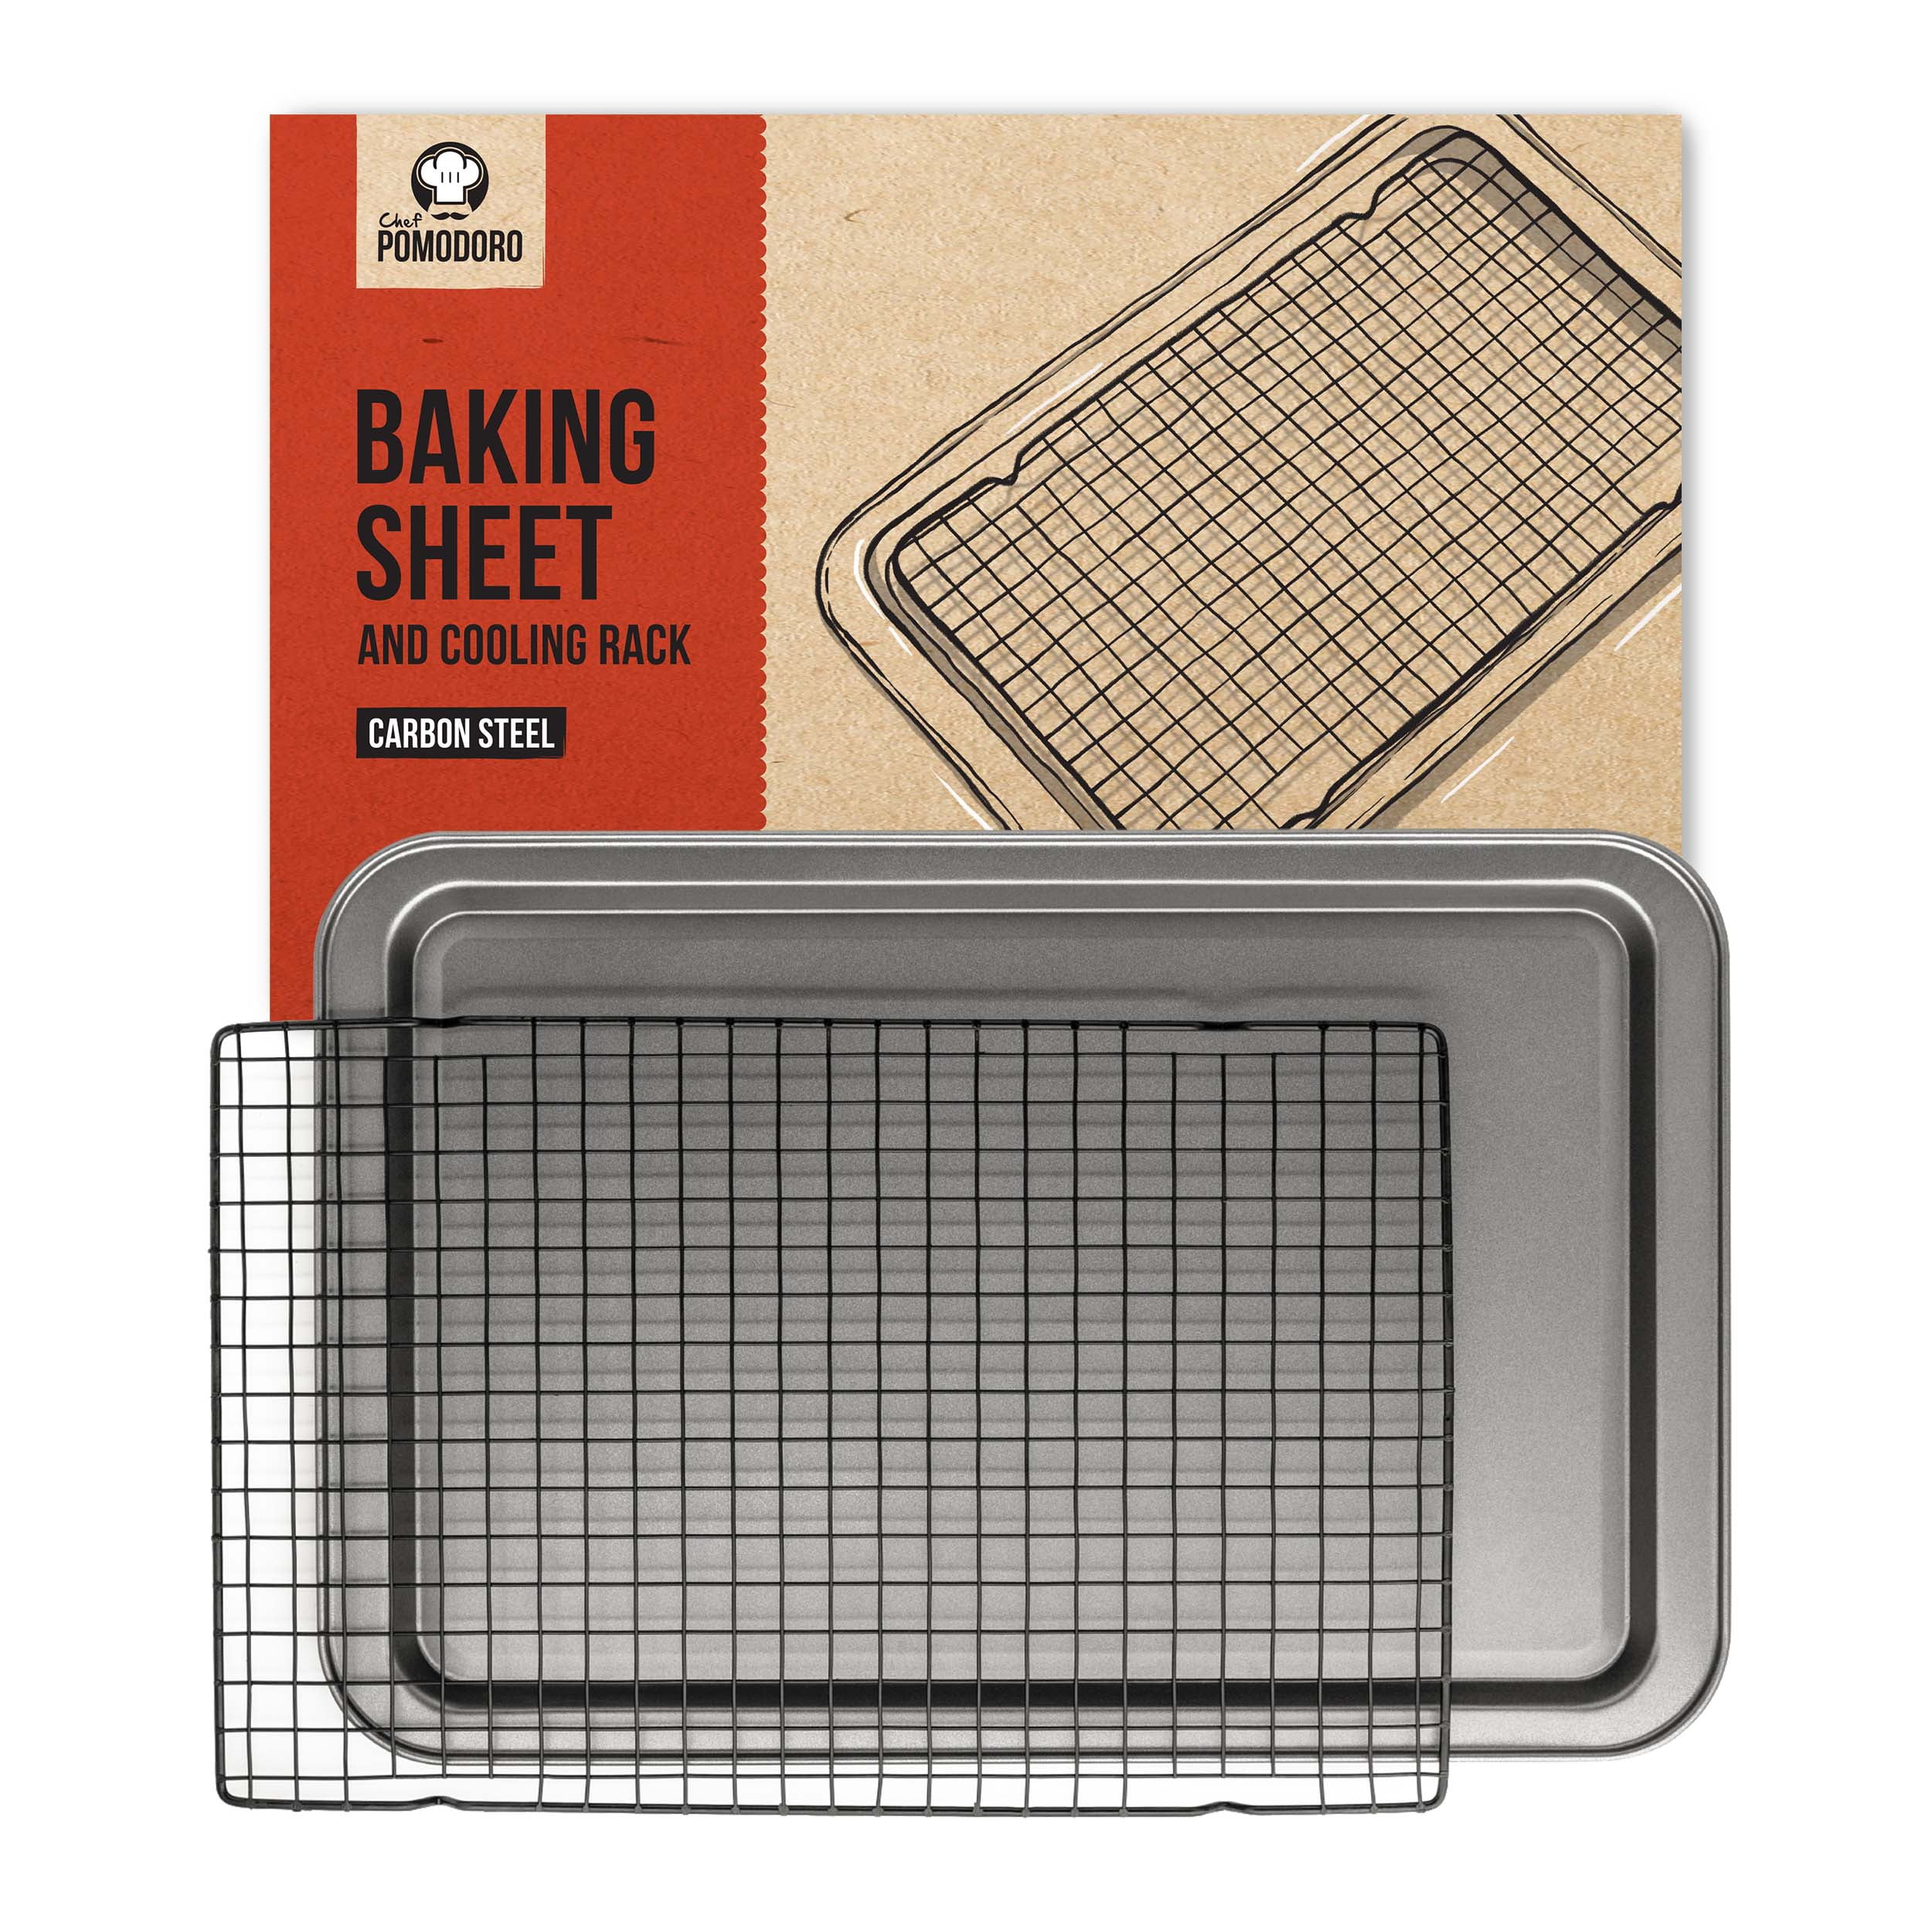 CHEFMADE 11-Inch Baking Sheet Pan, Non-Stick Square Jelly Roll Bakeware for  Oven Roasting Meat Bread Battenberg Pizzas Pastries 11.2 x 11.2 x 1.4